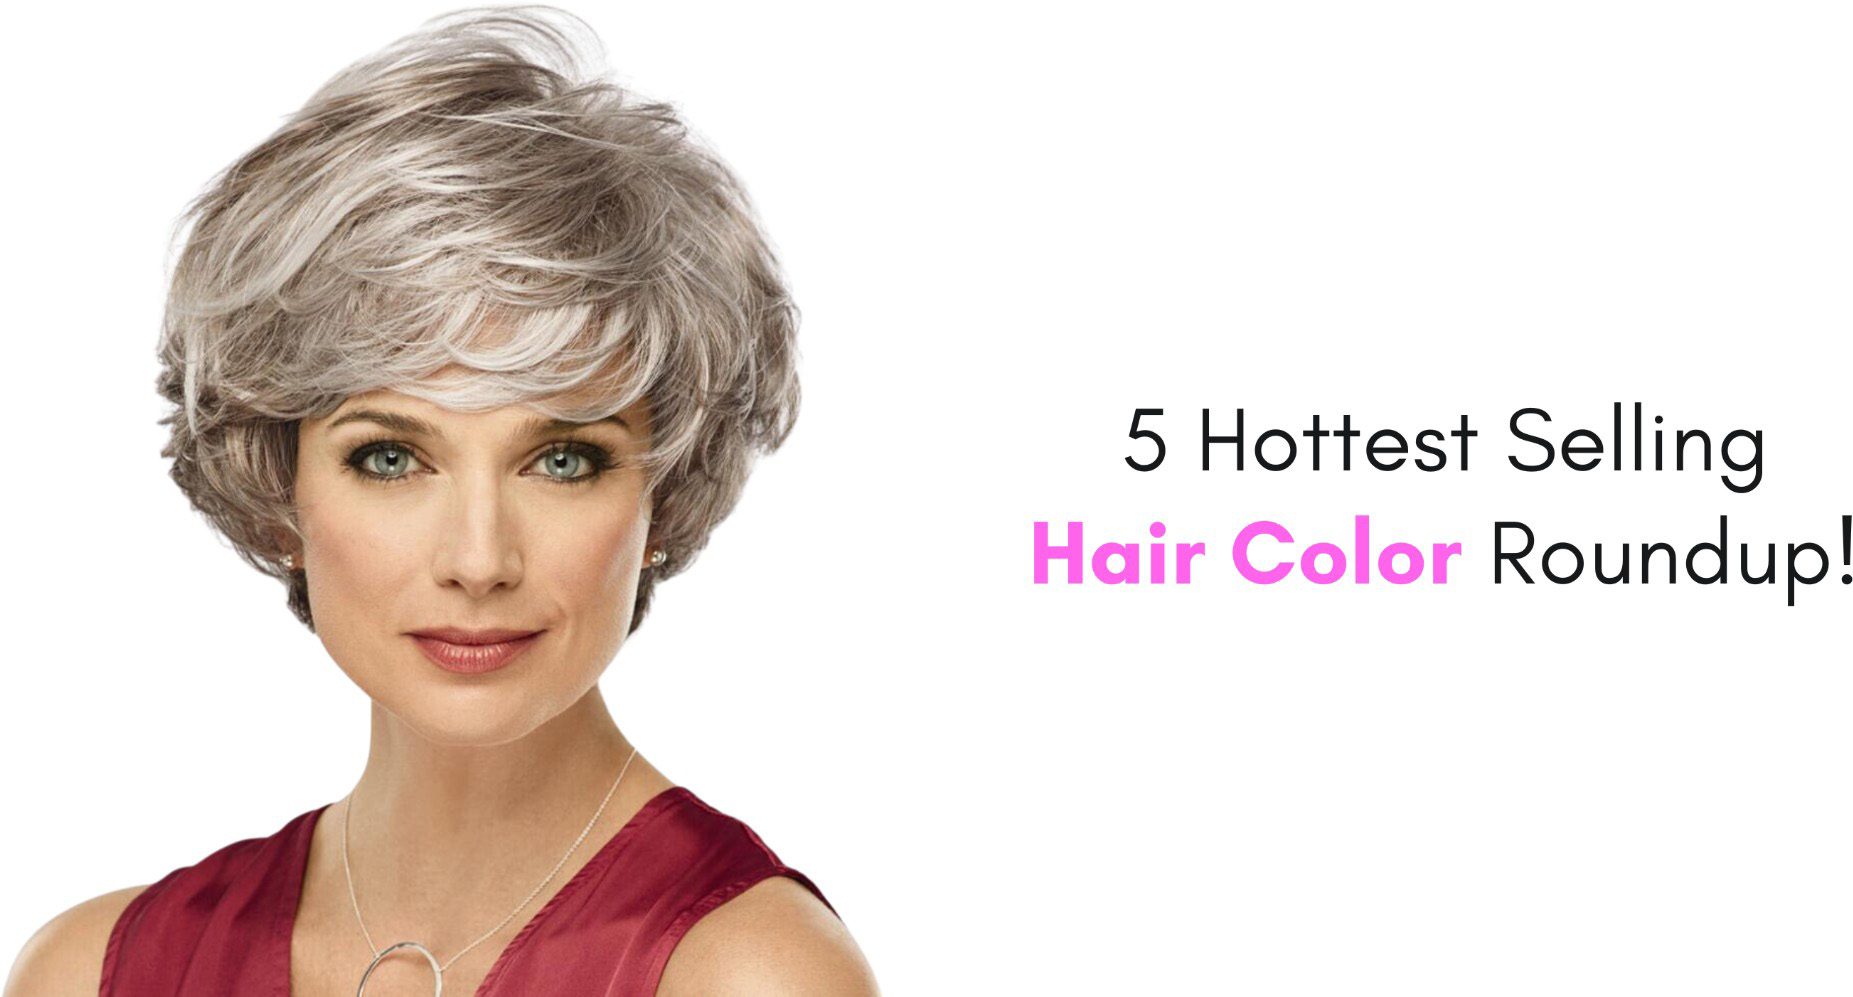 5. How to Achieve Professional-Looking Blonde Hair at Home - wide 1